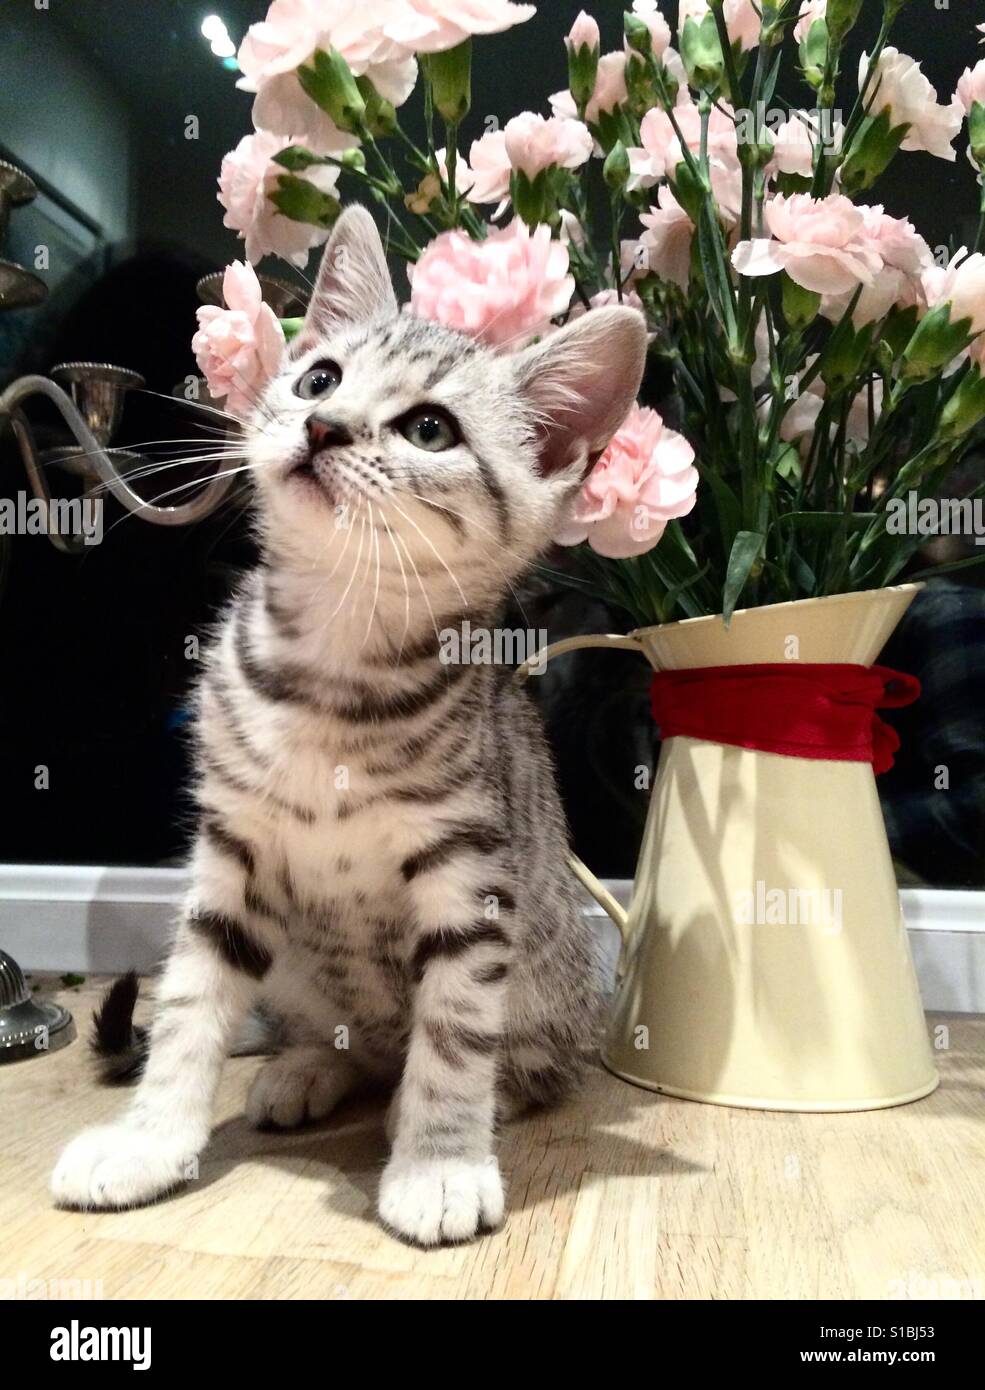 A kitten looking up as he sits next to a vase of flowers Stock Photo